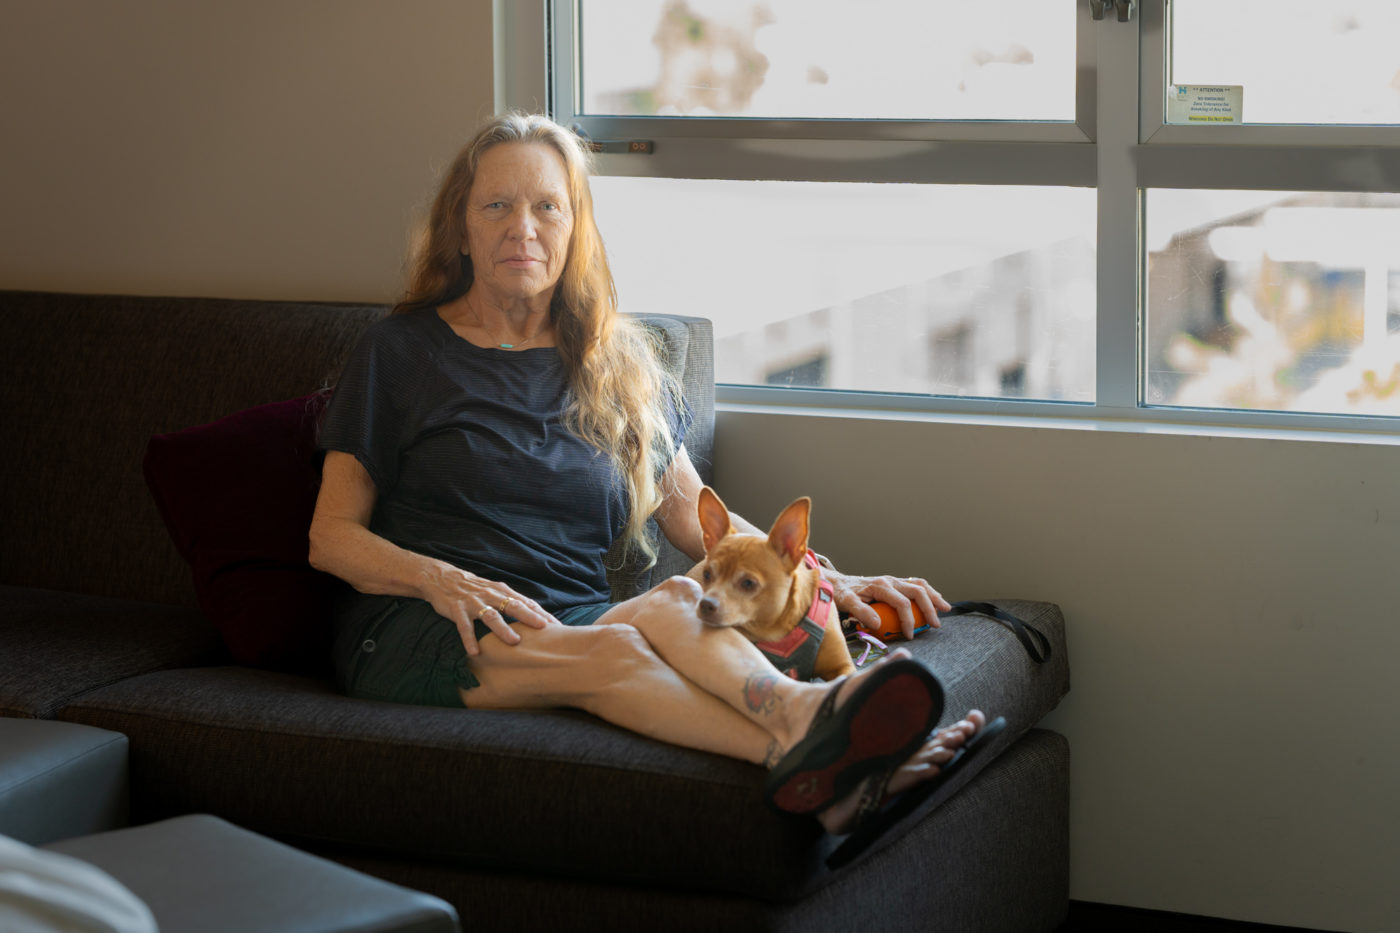 A thin, older white woman with wrinkled skin sitting solemnly on a hotel sofa by a window with her dog.